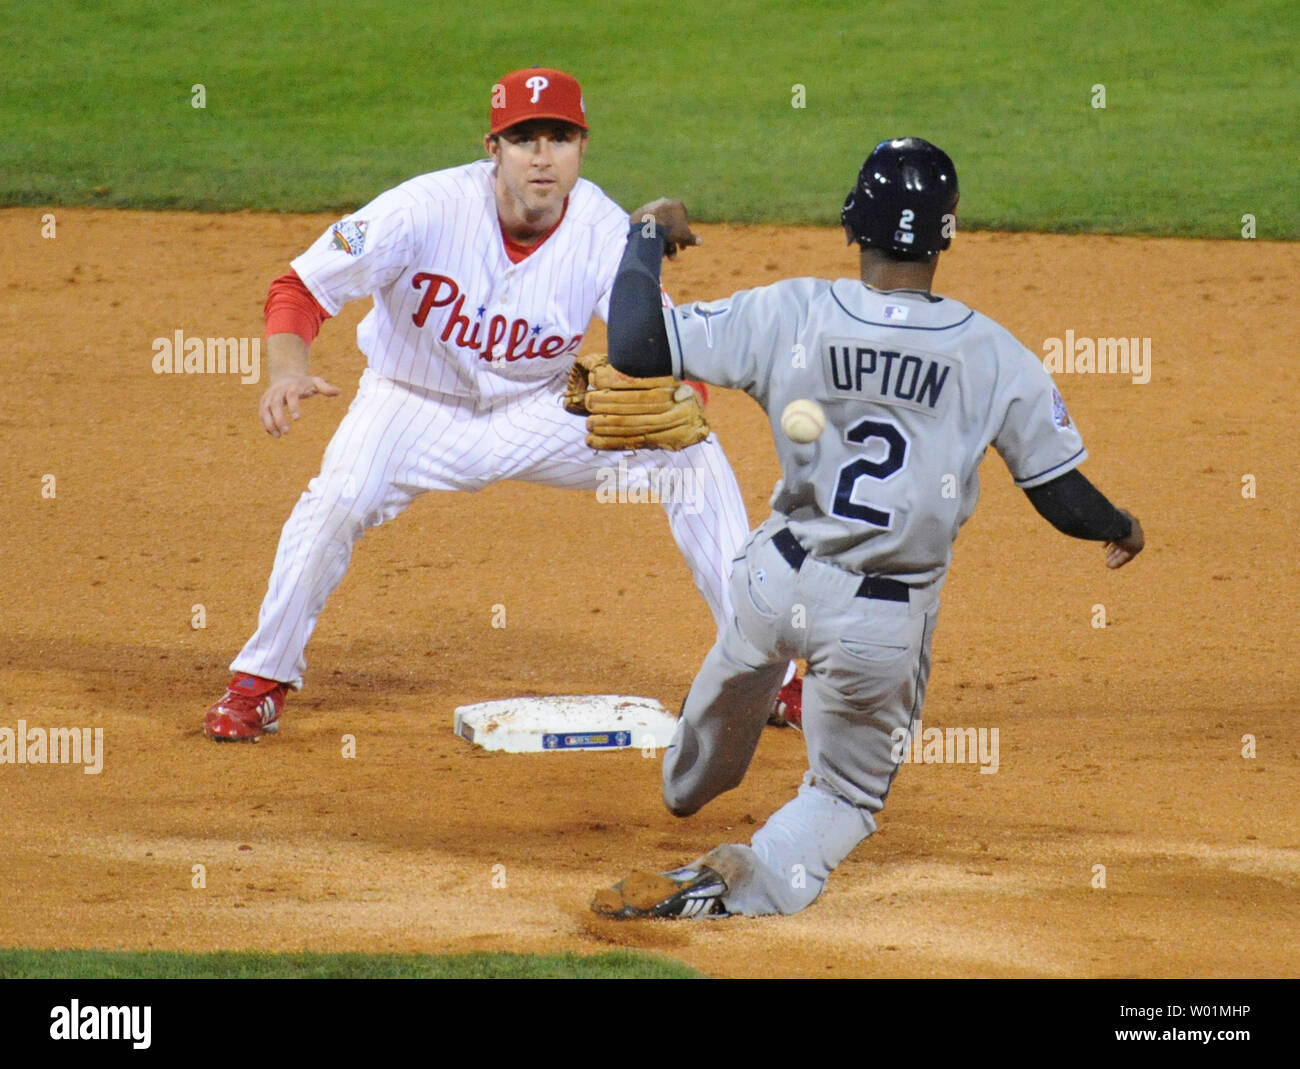 Philadelphia Phillies second basemen Chase Utley waits for the late throw as Tampa Bay Rays B.J. Upton steals second on an pick off play in the sixth of game three of World Series in Philadelphia, Pennsylvania on October 25, 2008.    (UPI Photo/Pat Benic) Stock Photo